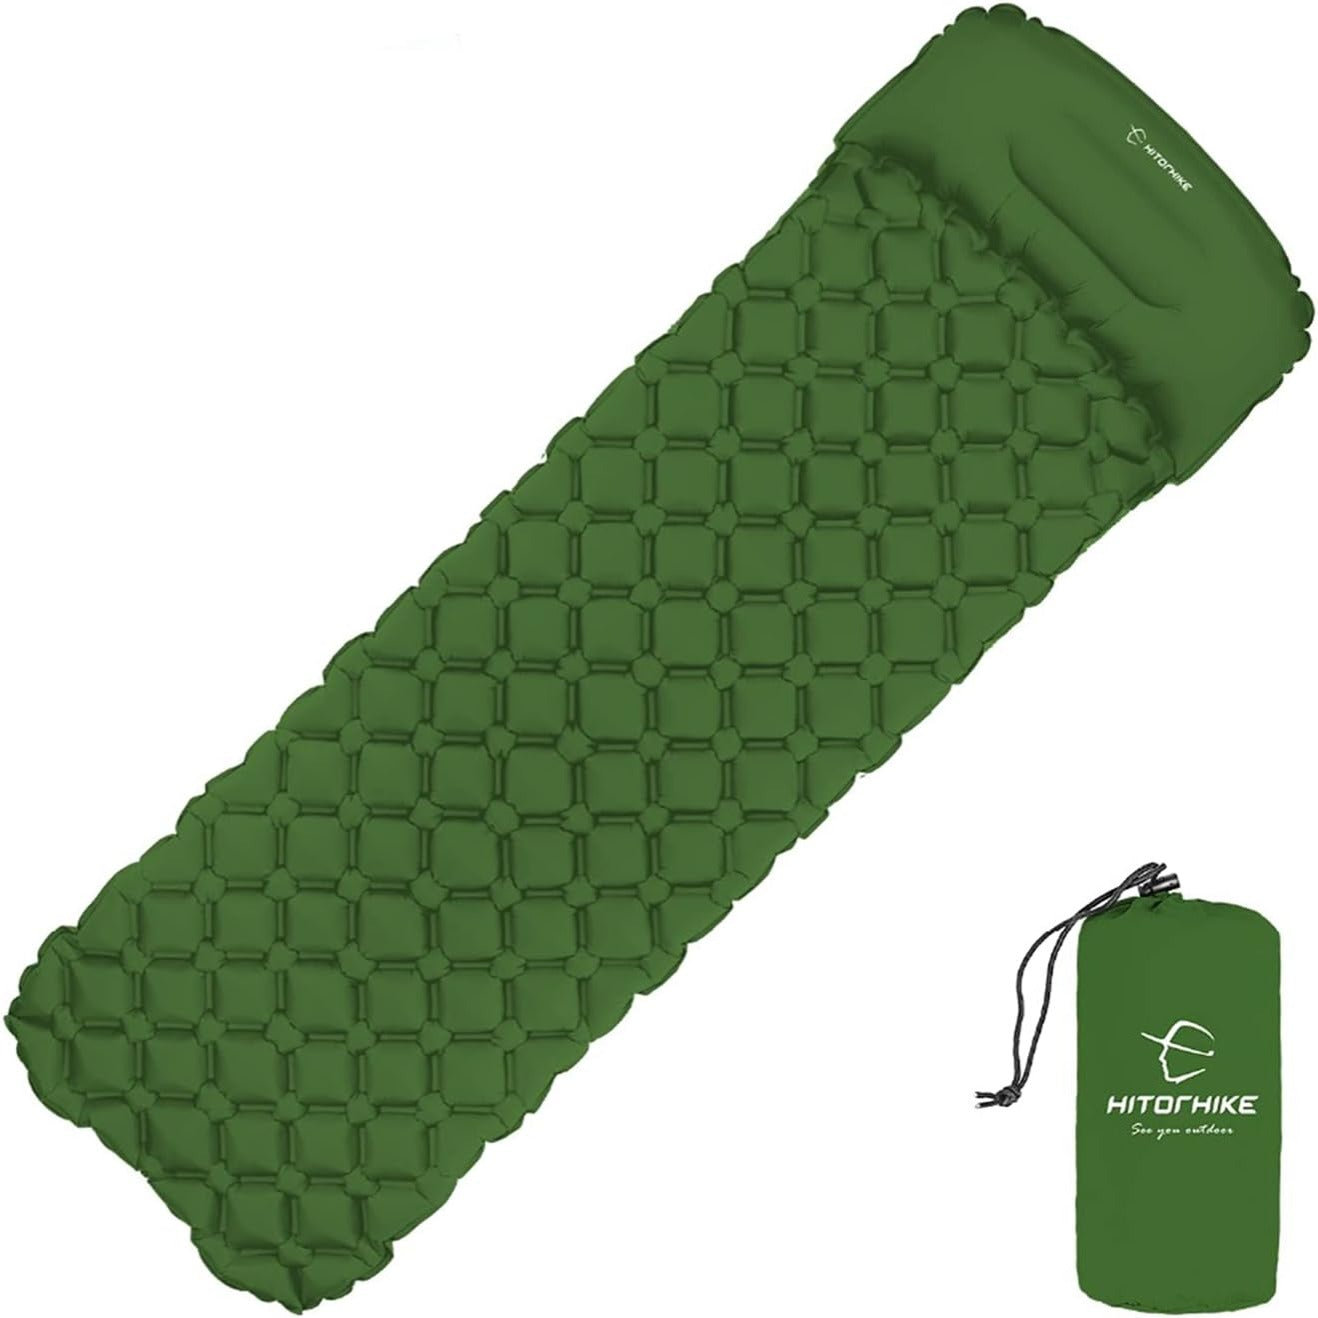 Single Thick Inflatable Camping Mattress